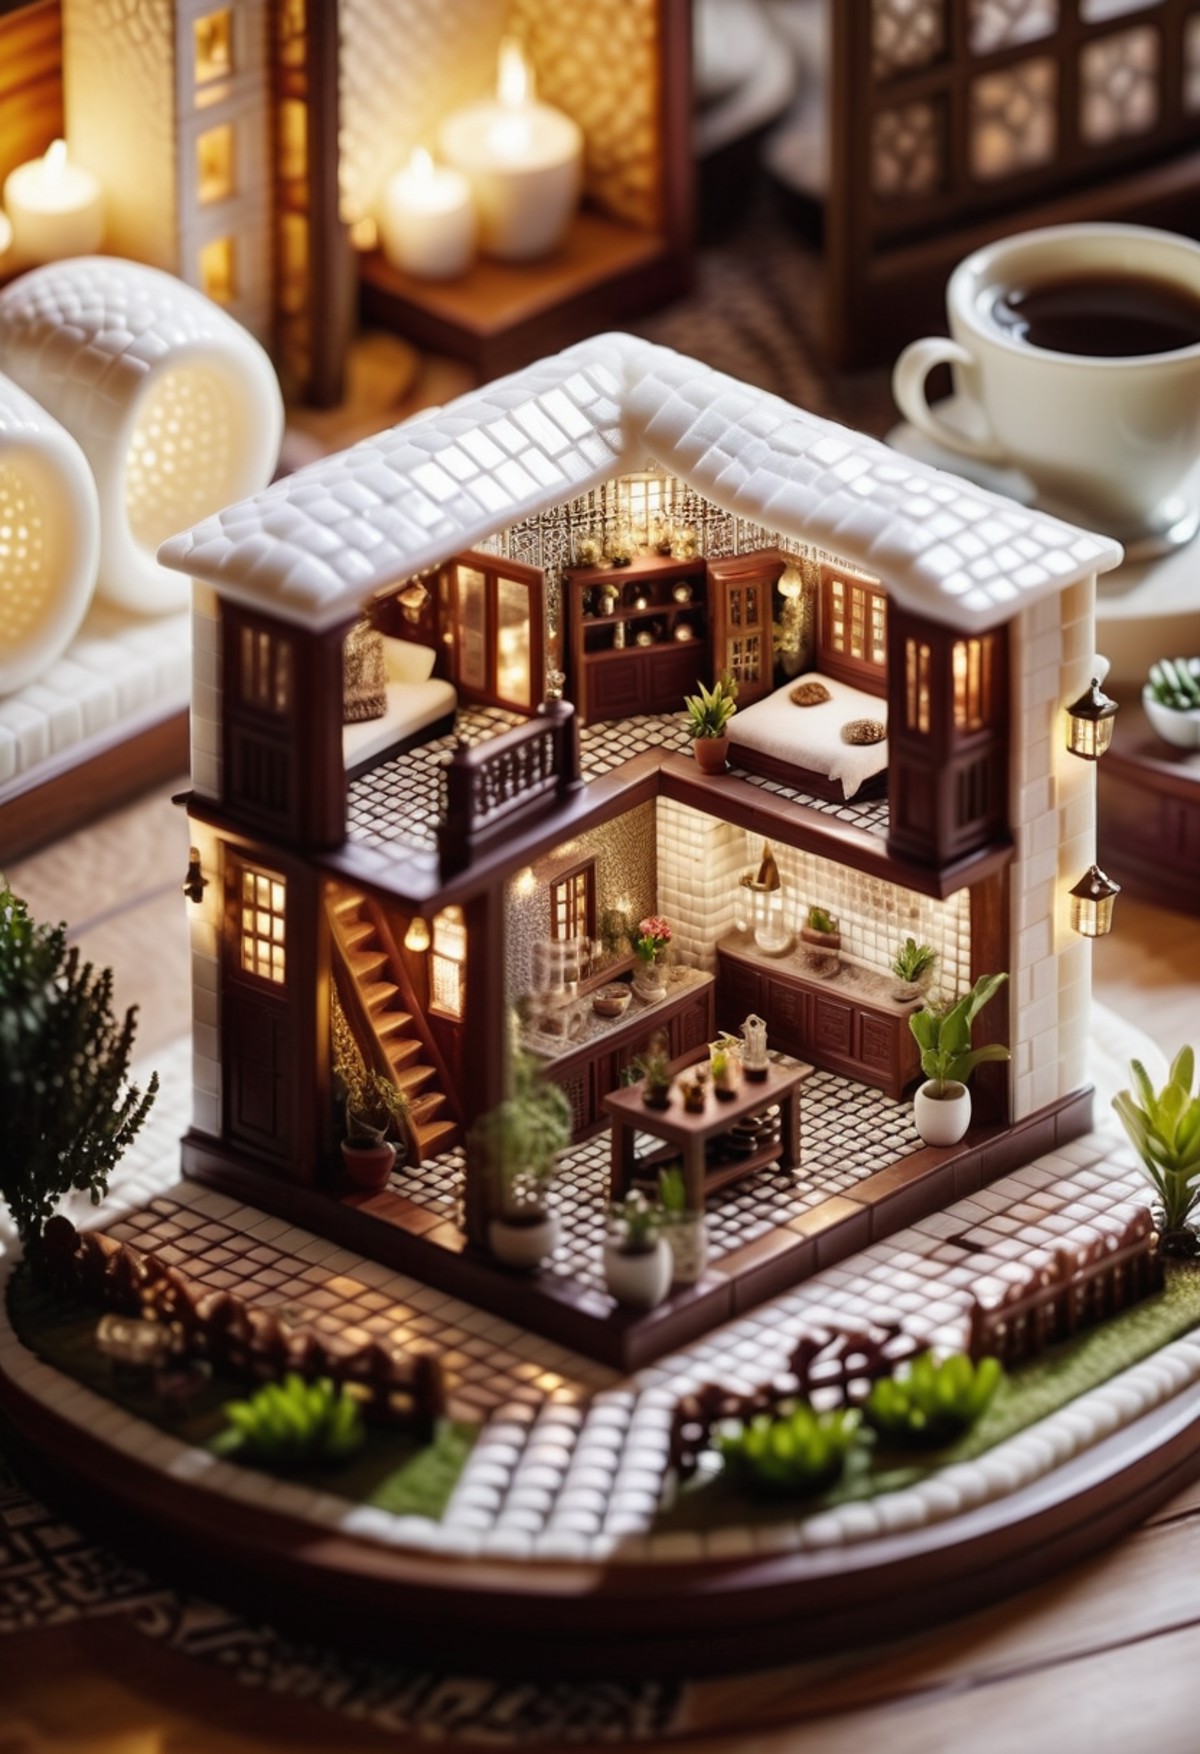 cinematic photo in a cozy living room, a miniature house inside a cozy smoothie houses a steamy microcosm. The walls are m...